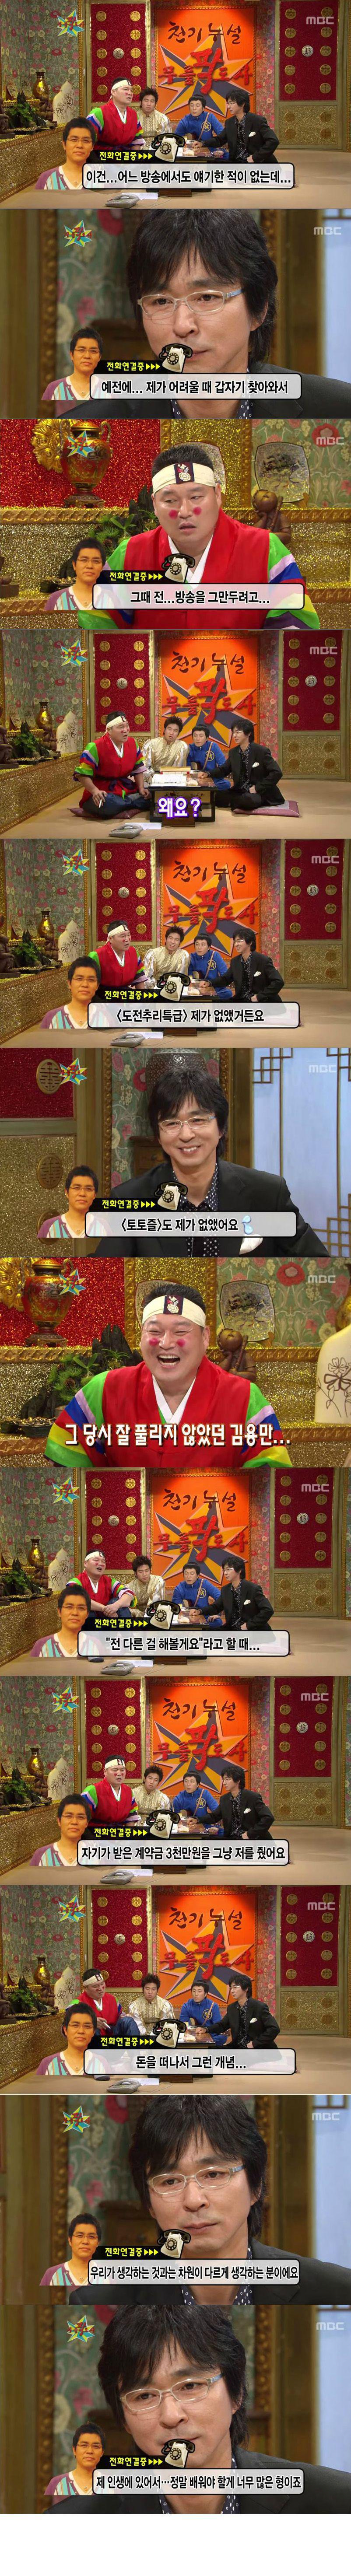 What comedians say about Kim Kookjin's personality